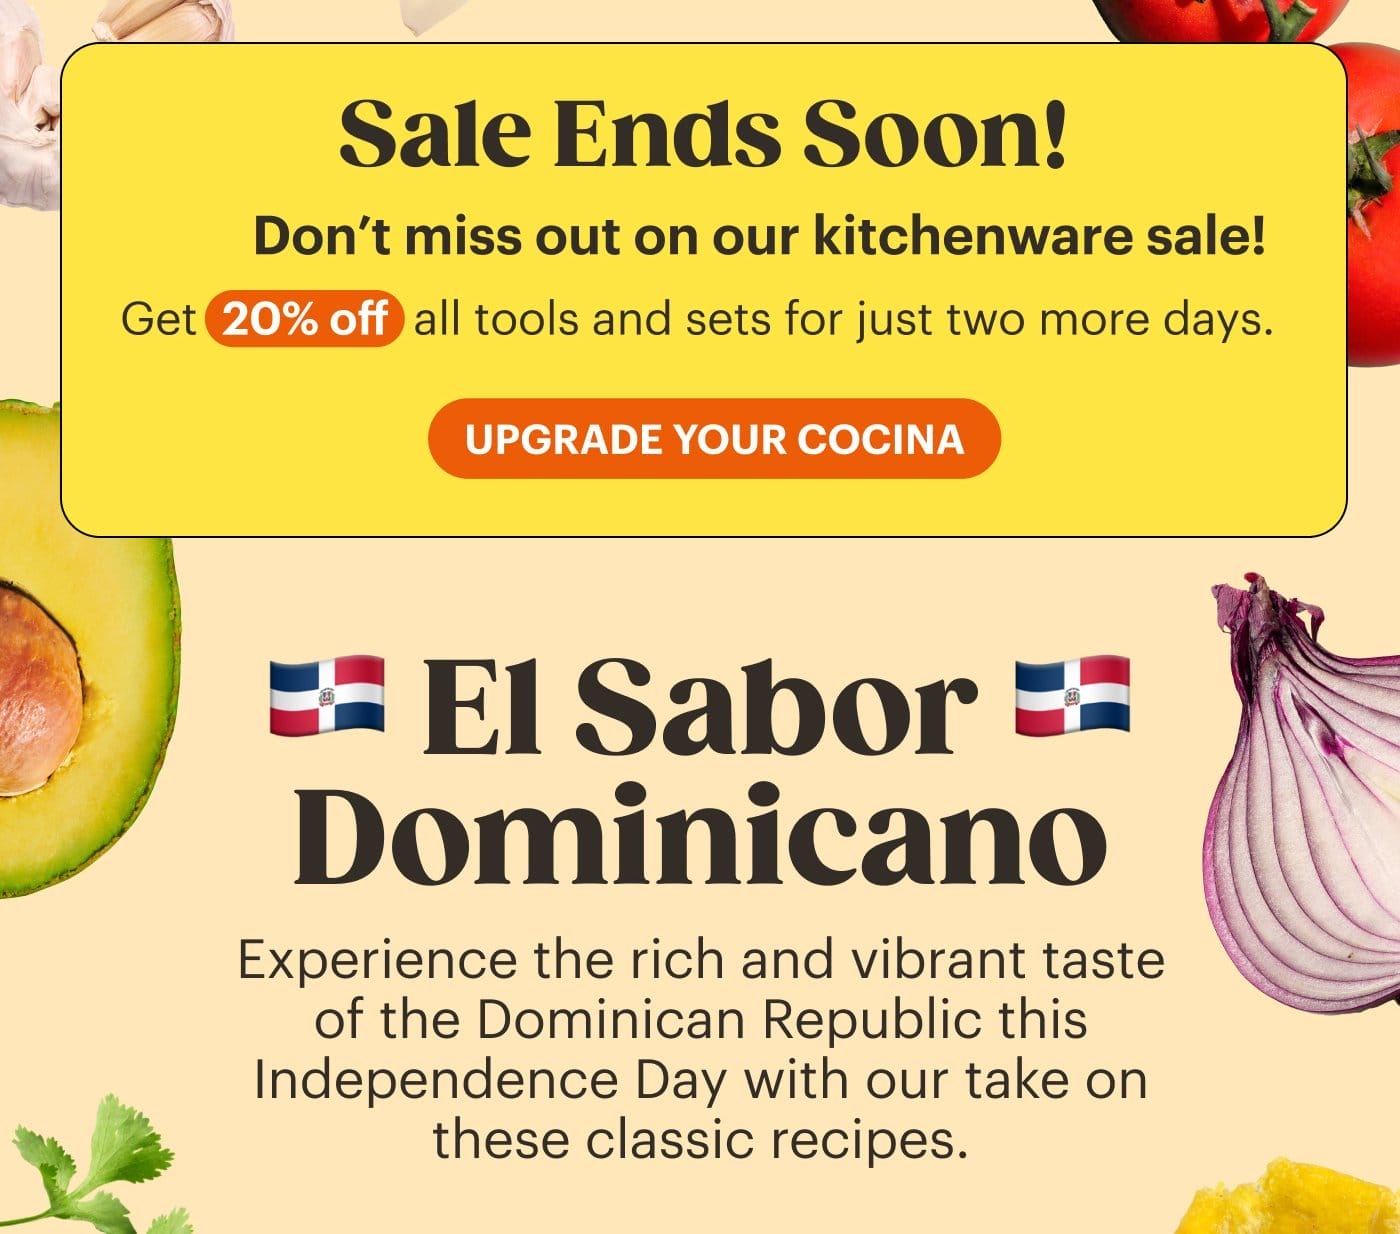 Sale Ends Soon! UPGRADE YOUR COCINA